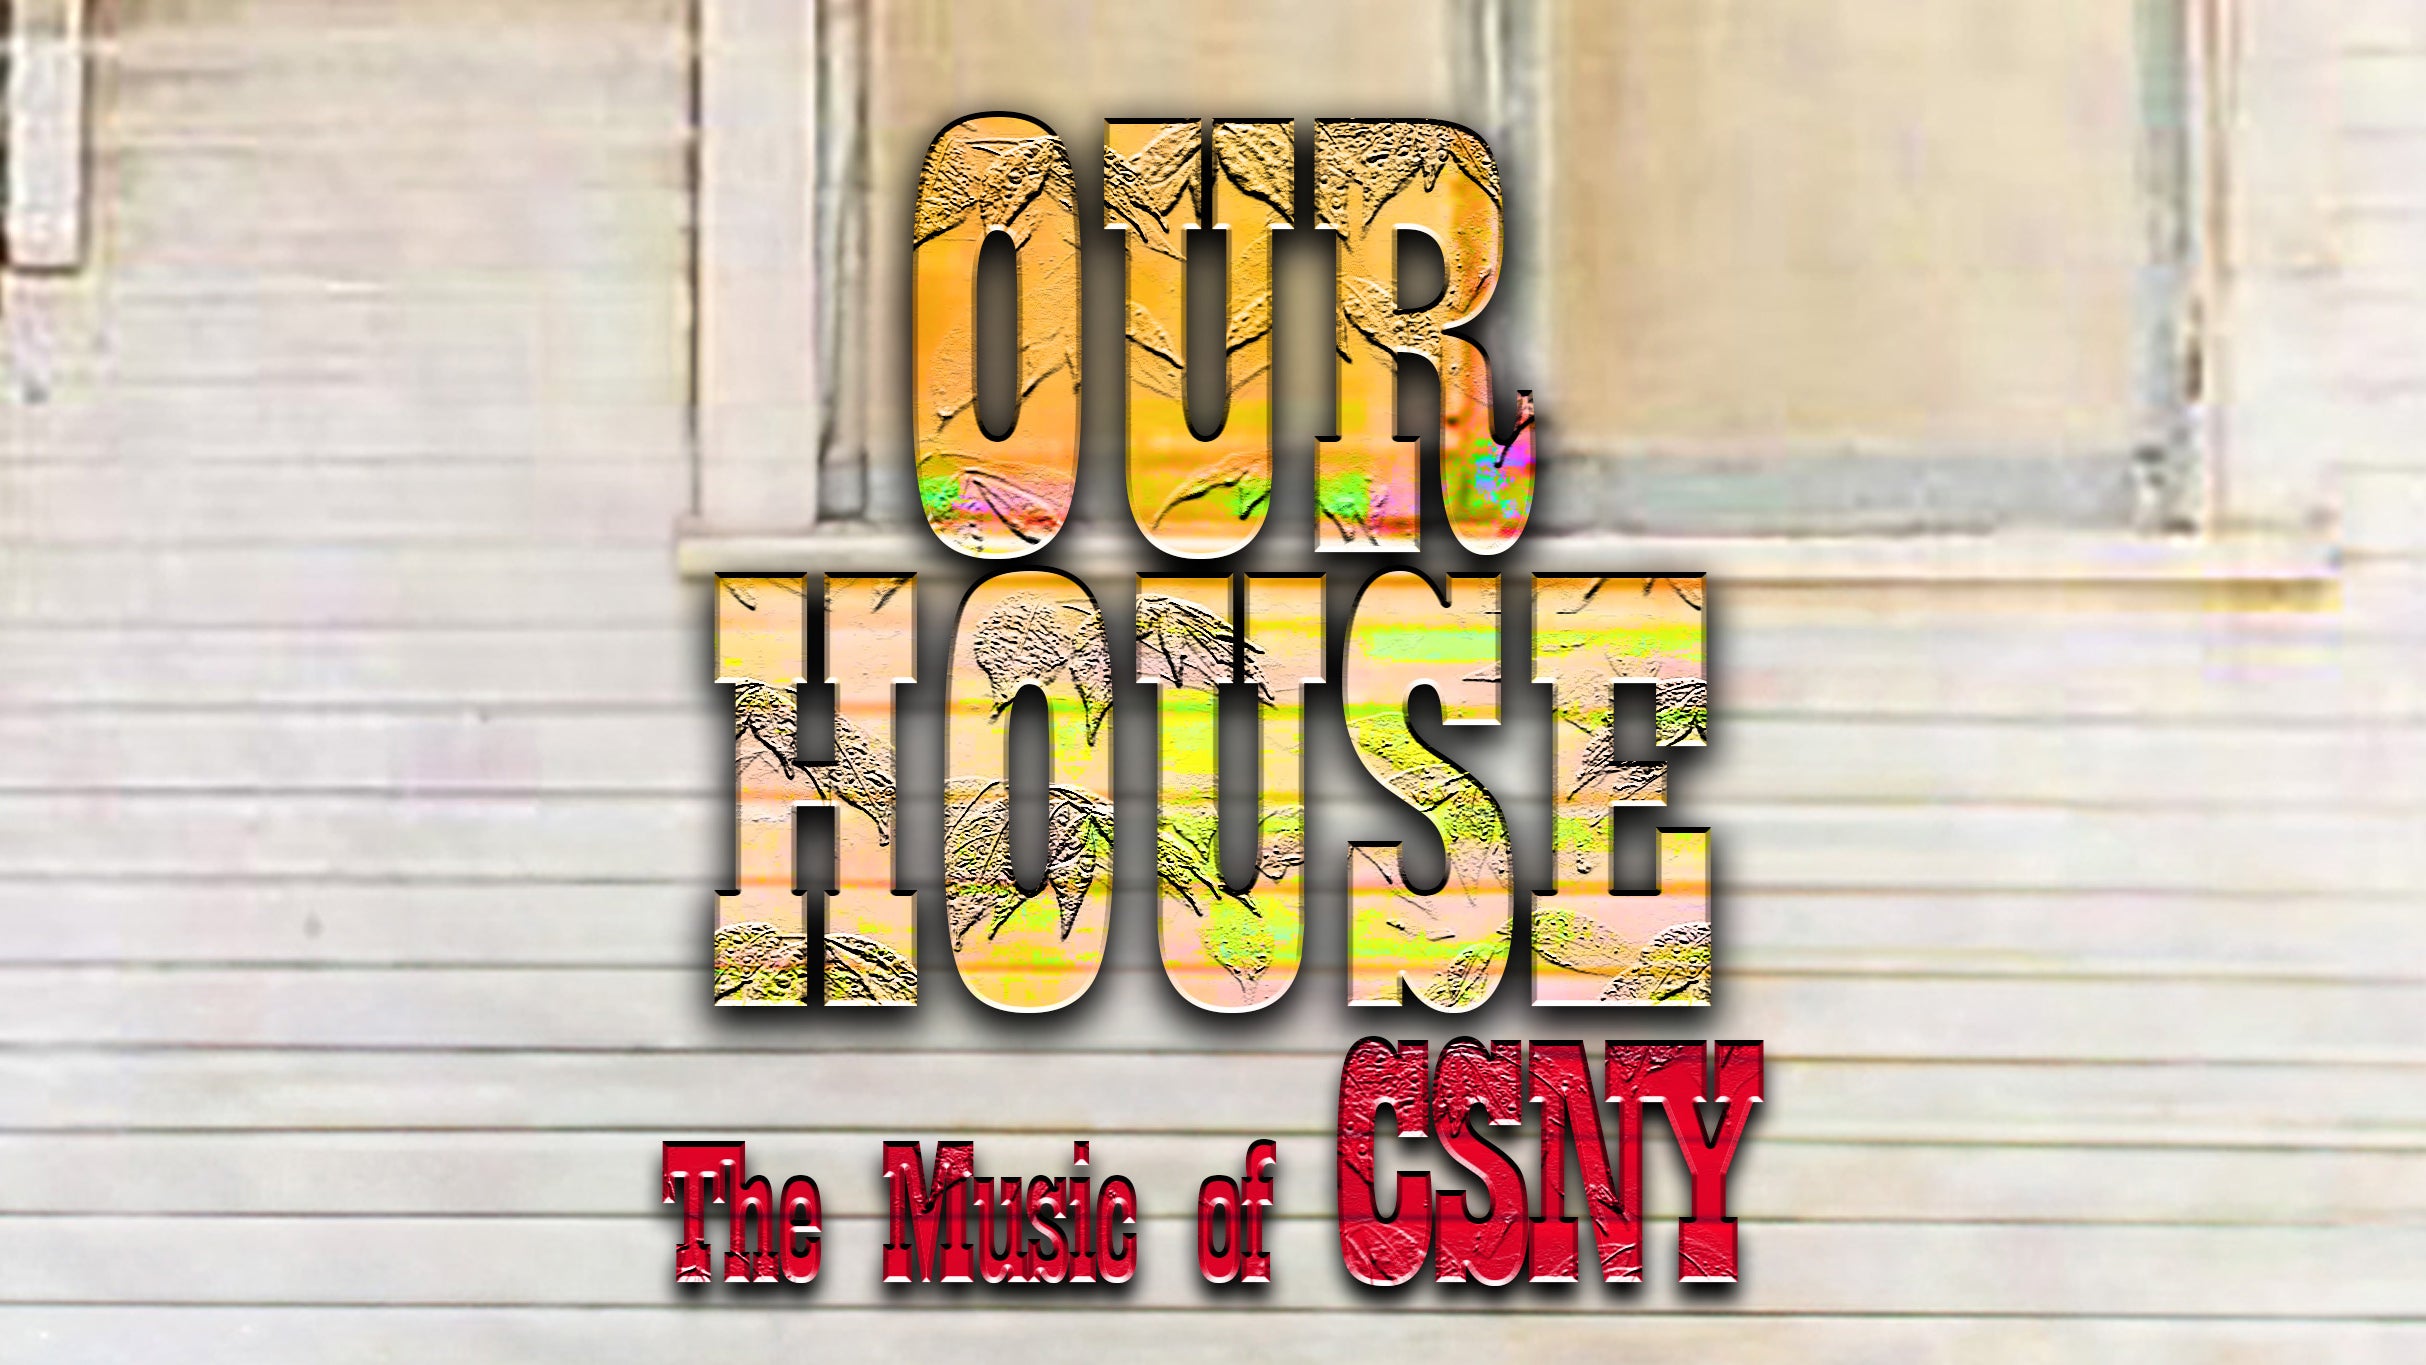 Our House: The Music Of Crosby, Stills, Nash & Young in Bethel promo photo for Venue presale offer code